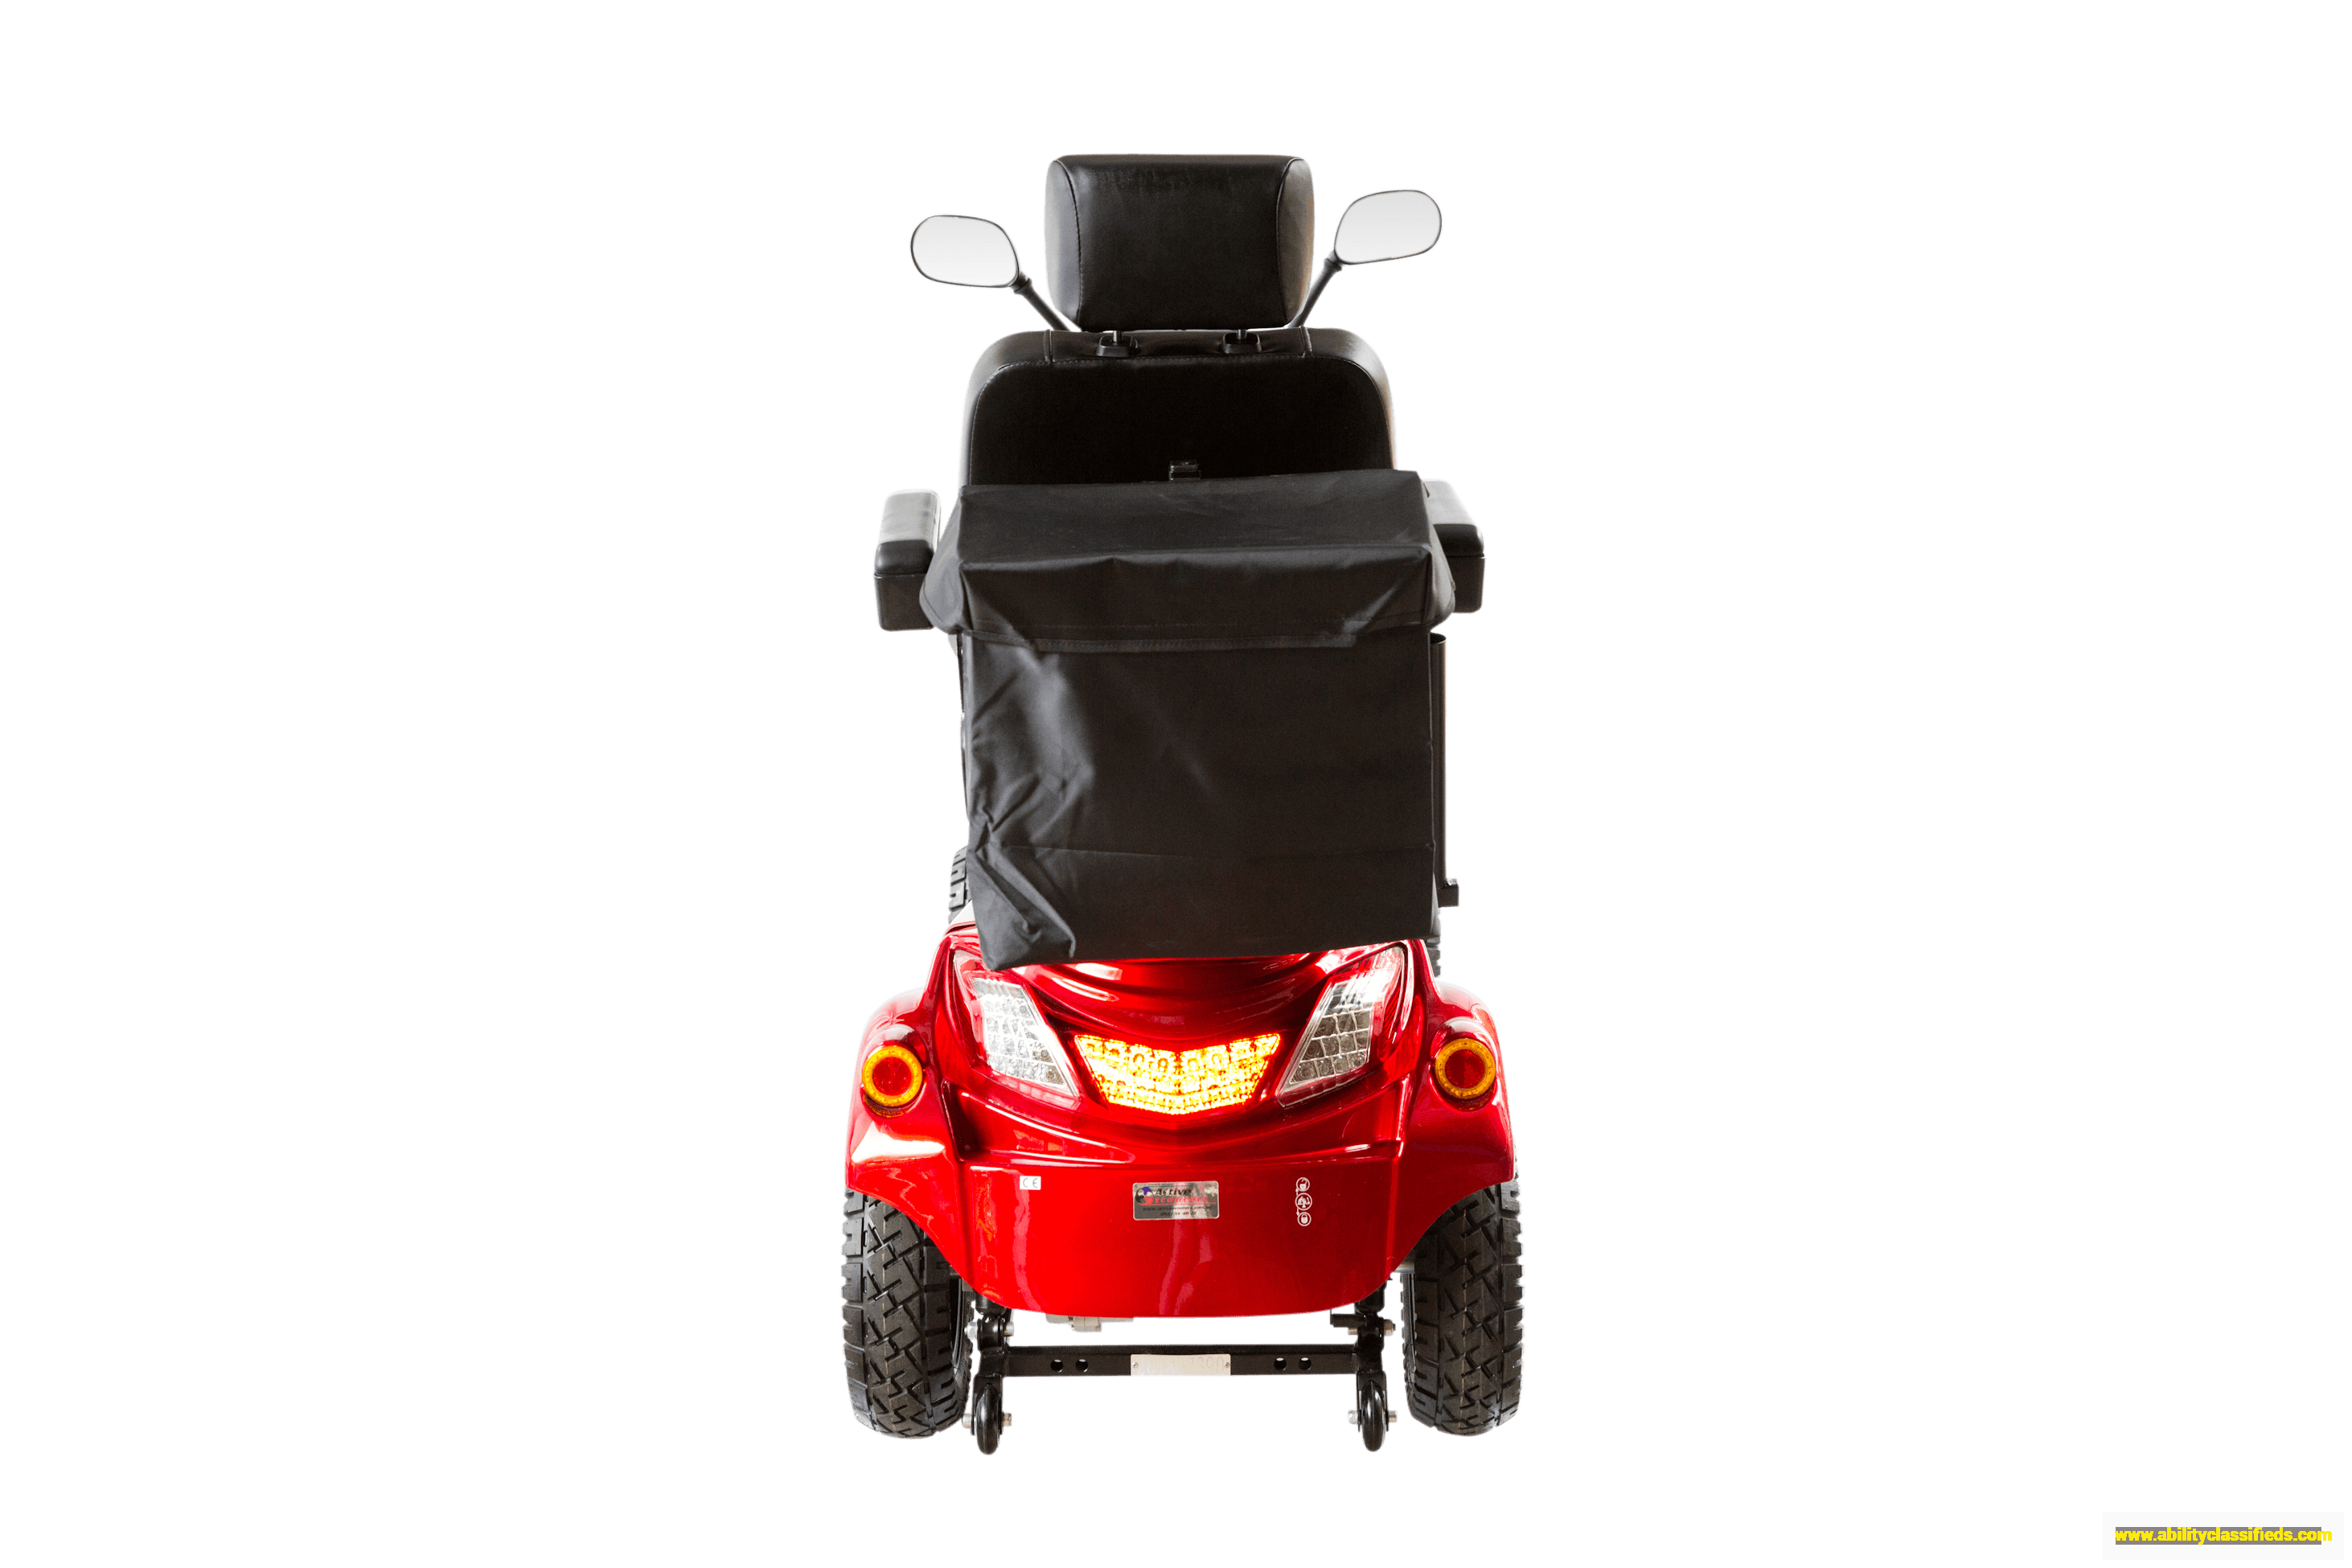 Deluxe Mobility Scooter – Model A90